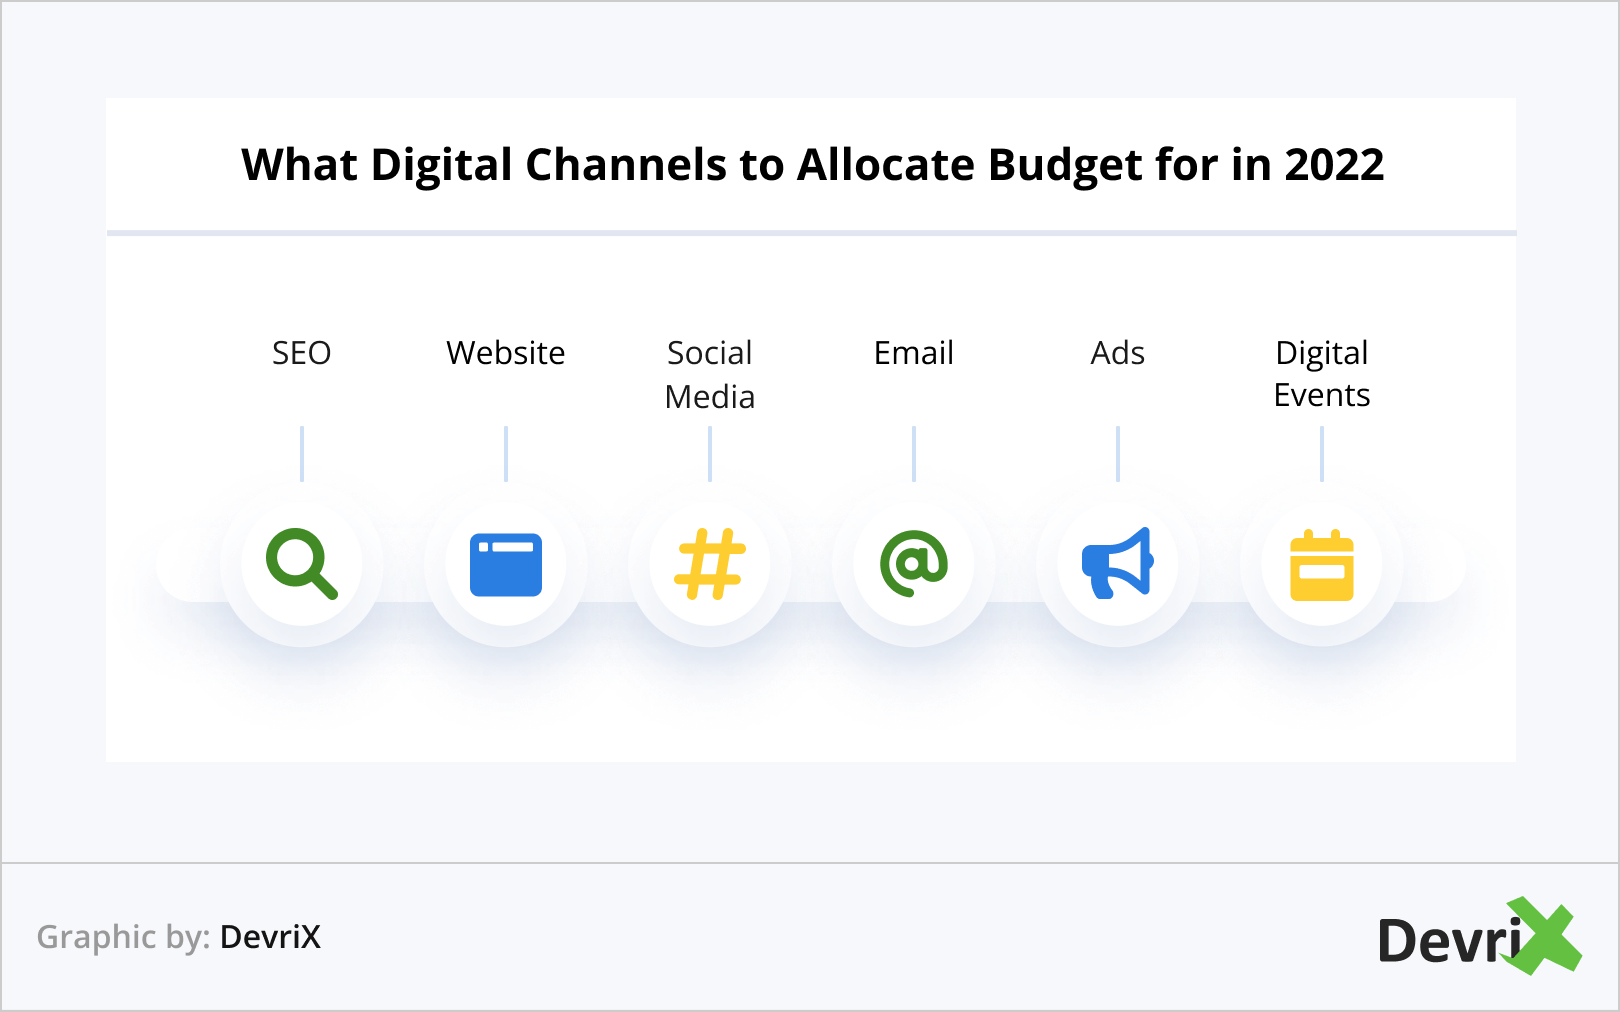 What Digital Channels to Allocate Budget for in 2022